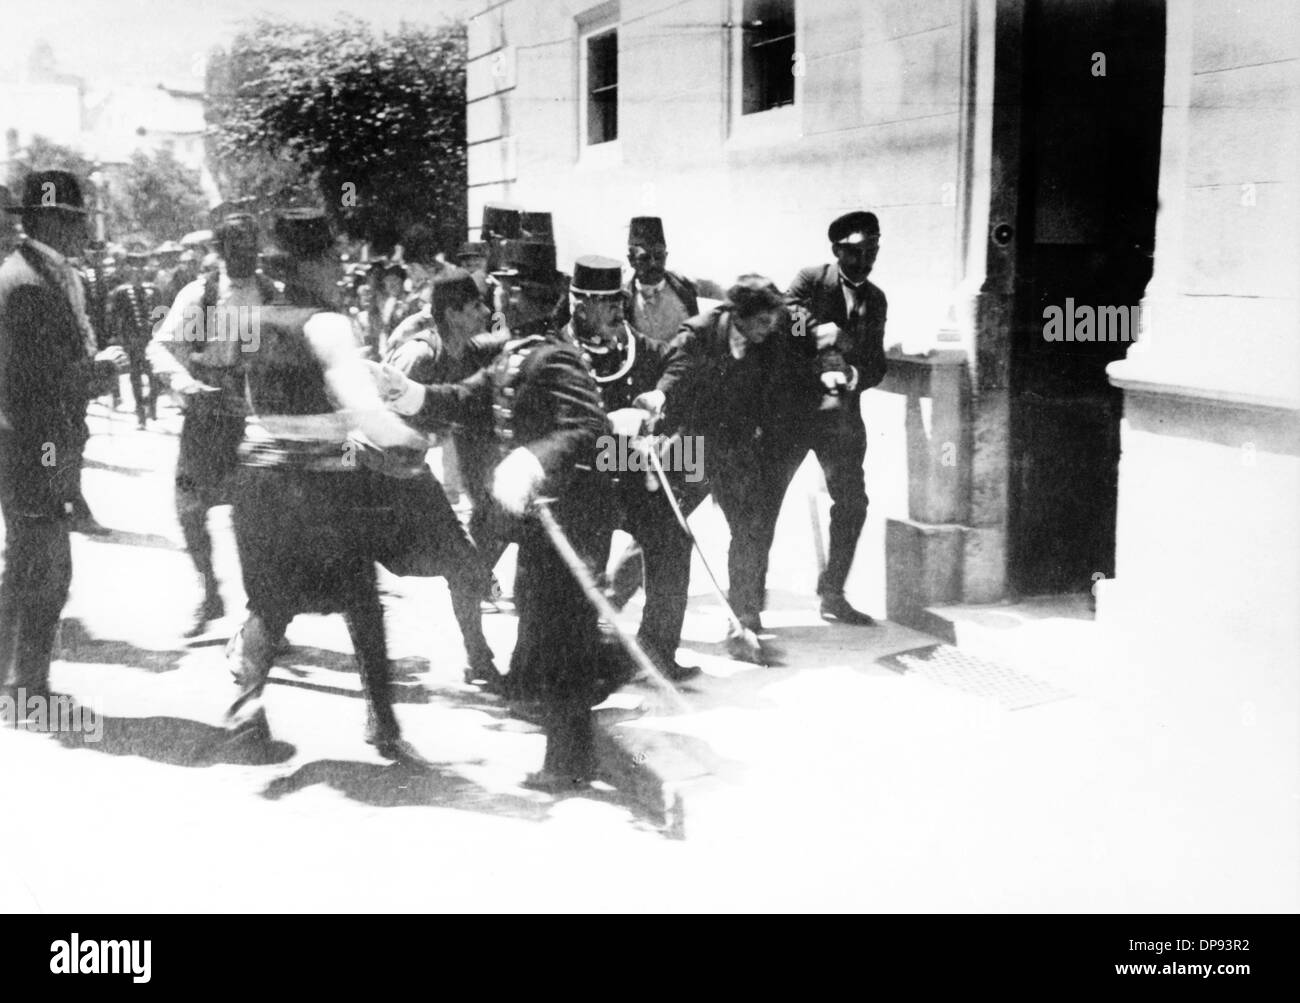 The assassins of the Austrian heir presumptive to the Austro-Hungarian throne Archduke Franz Ferdinand, Nedeljko Cabrinovic, is arrested after the assassination in Sarajevo on 28 June 1914. The assassination and the events following it led to the outbreak of the First World War. Fotoarchiv für Zeitgeschichte Stock Photo